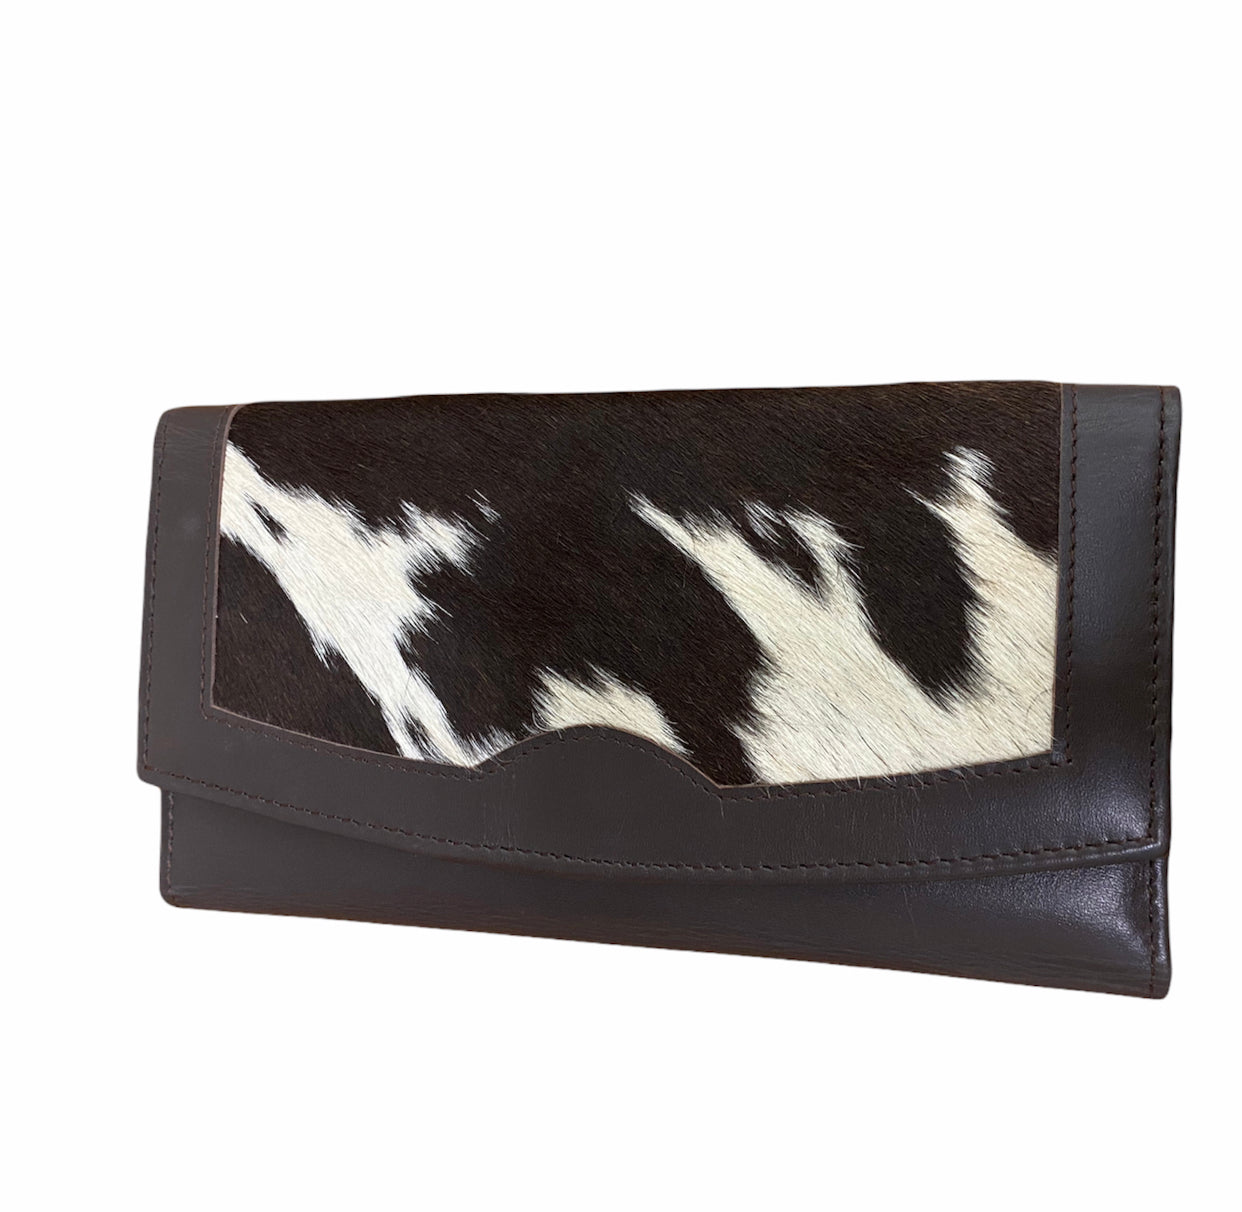 A7760 - Hair-On Collection Secretary Style Wallet